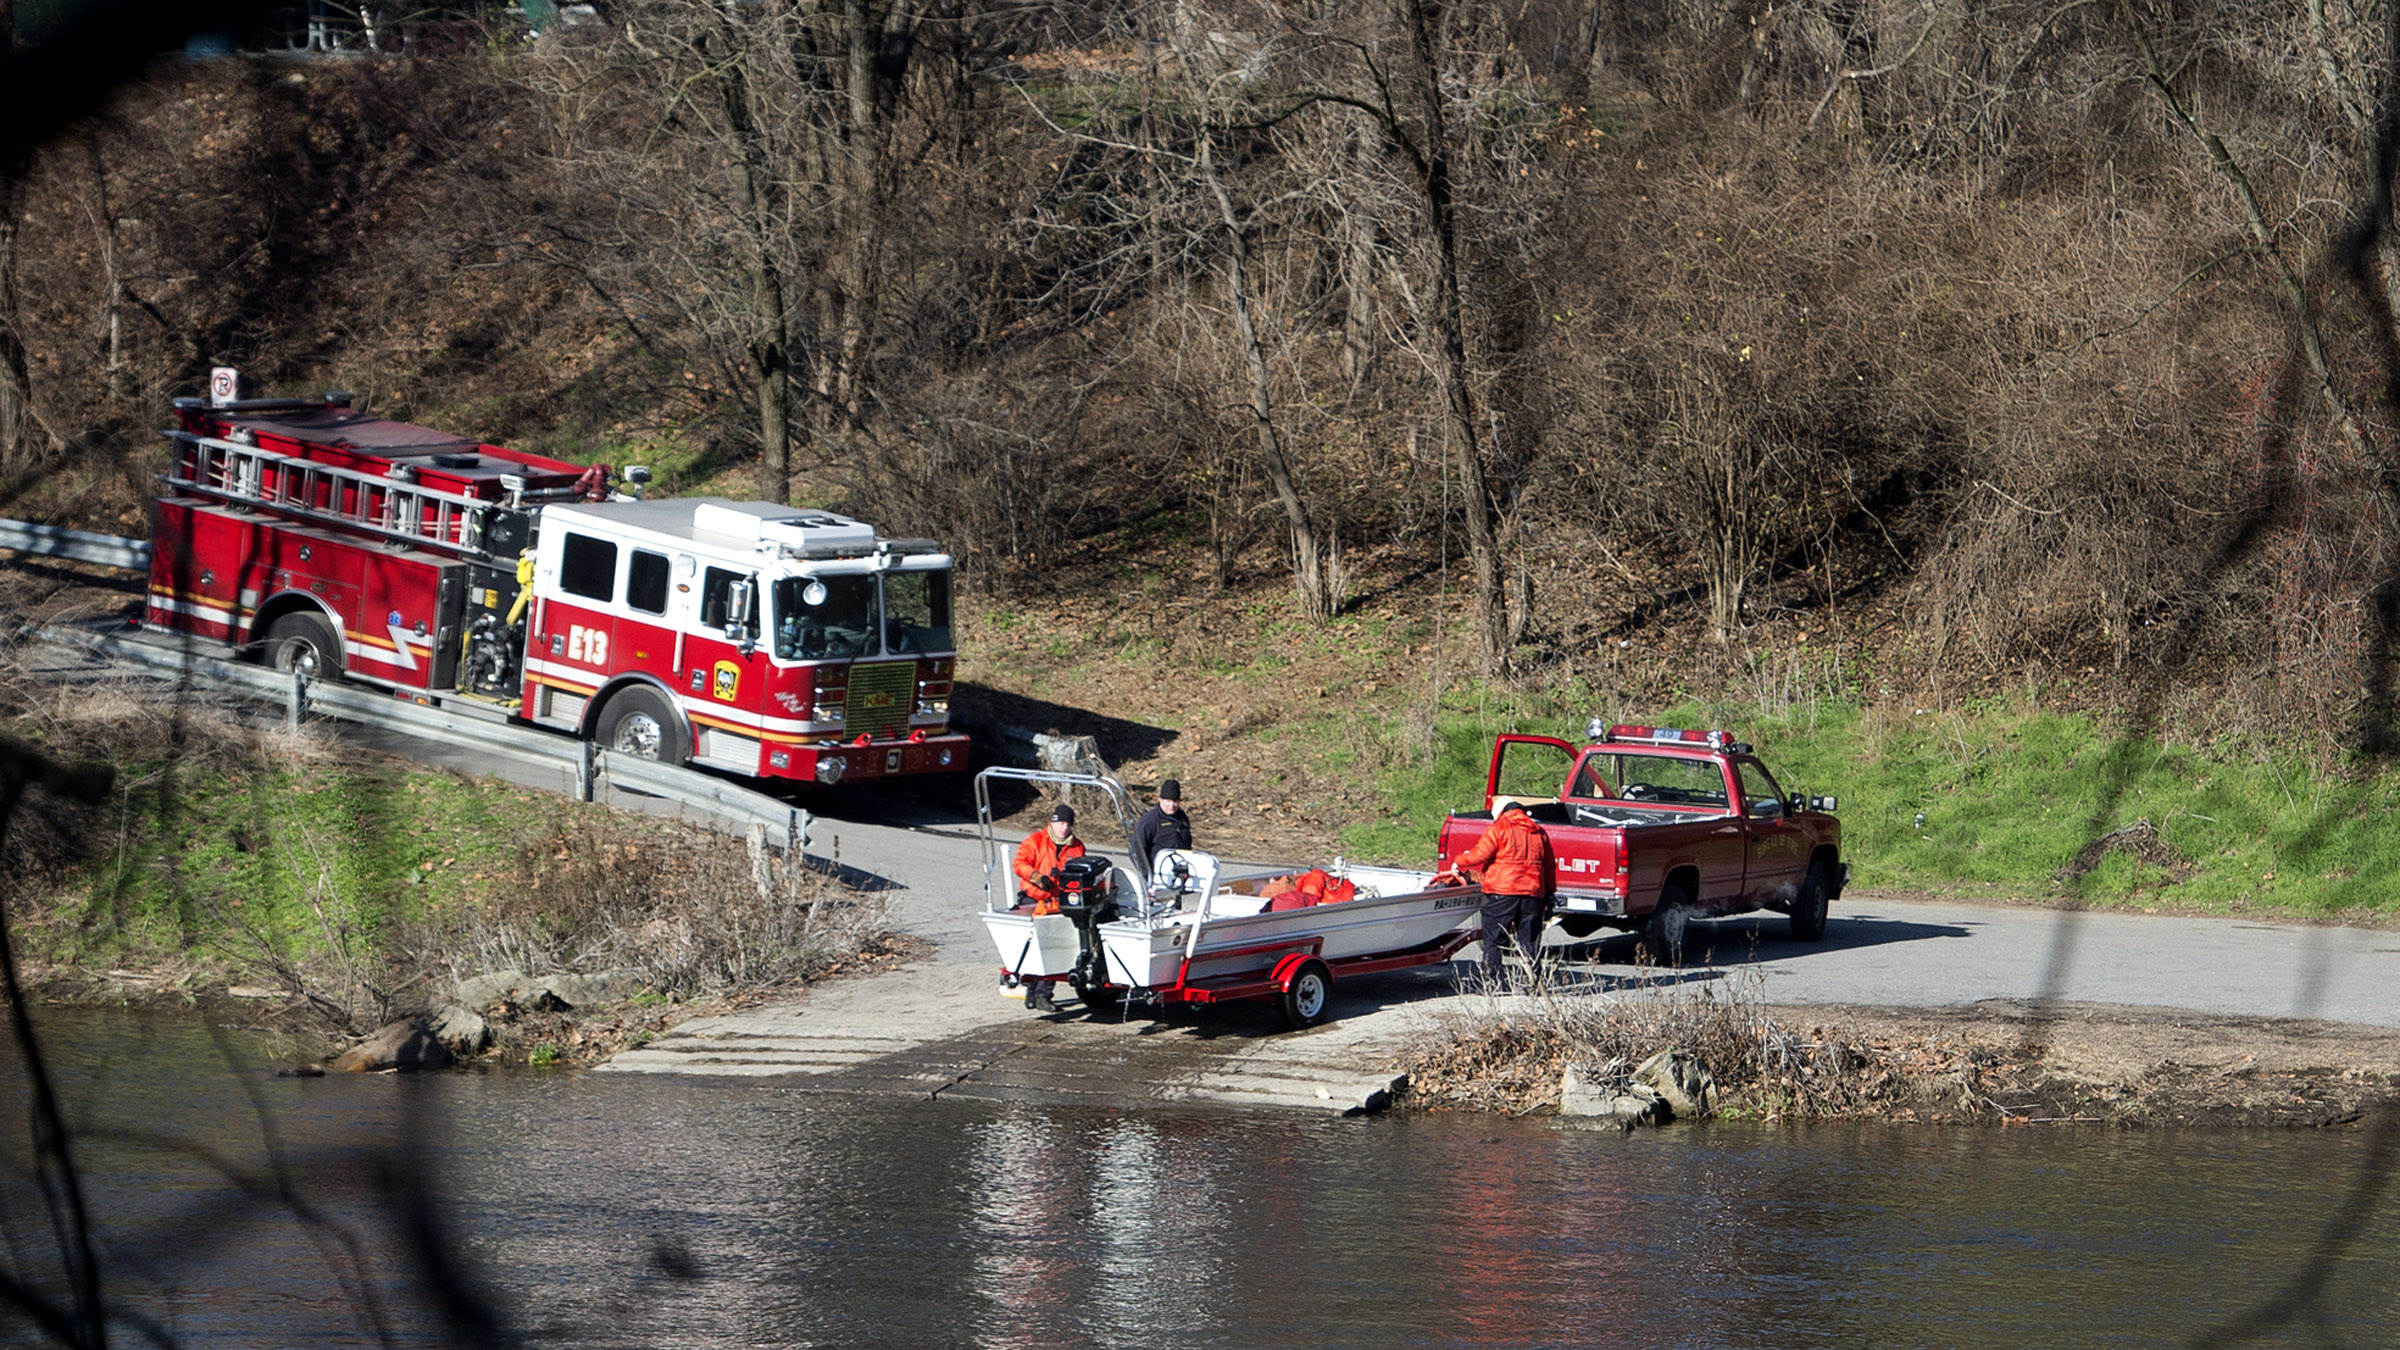 Authorities remove a boat after searching the Lehigh River for Jayliel Vega Batista in Allentown, Pa. on Jan. 2, 2016.